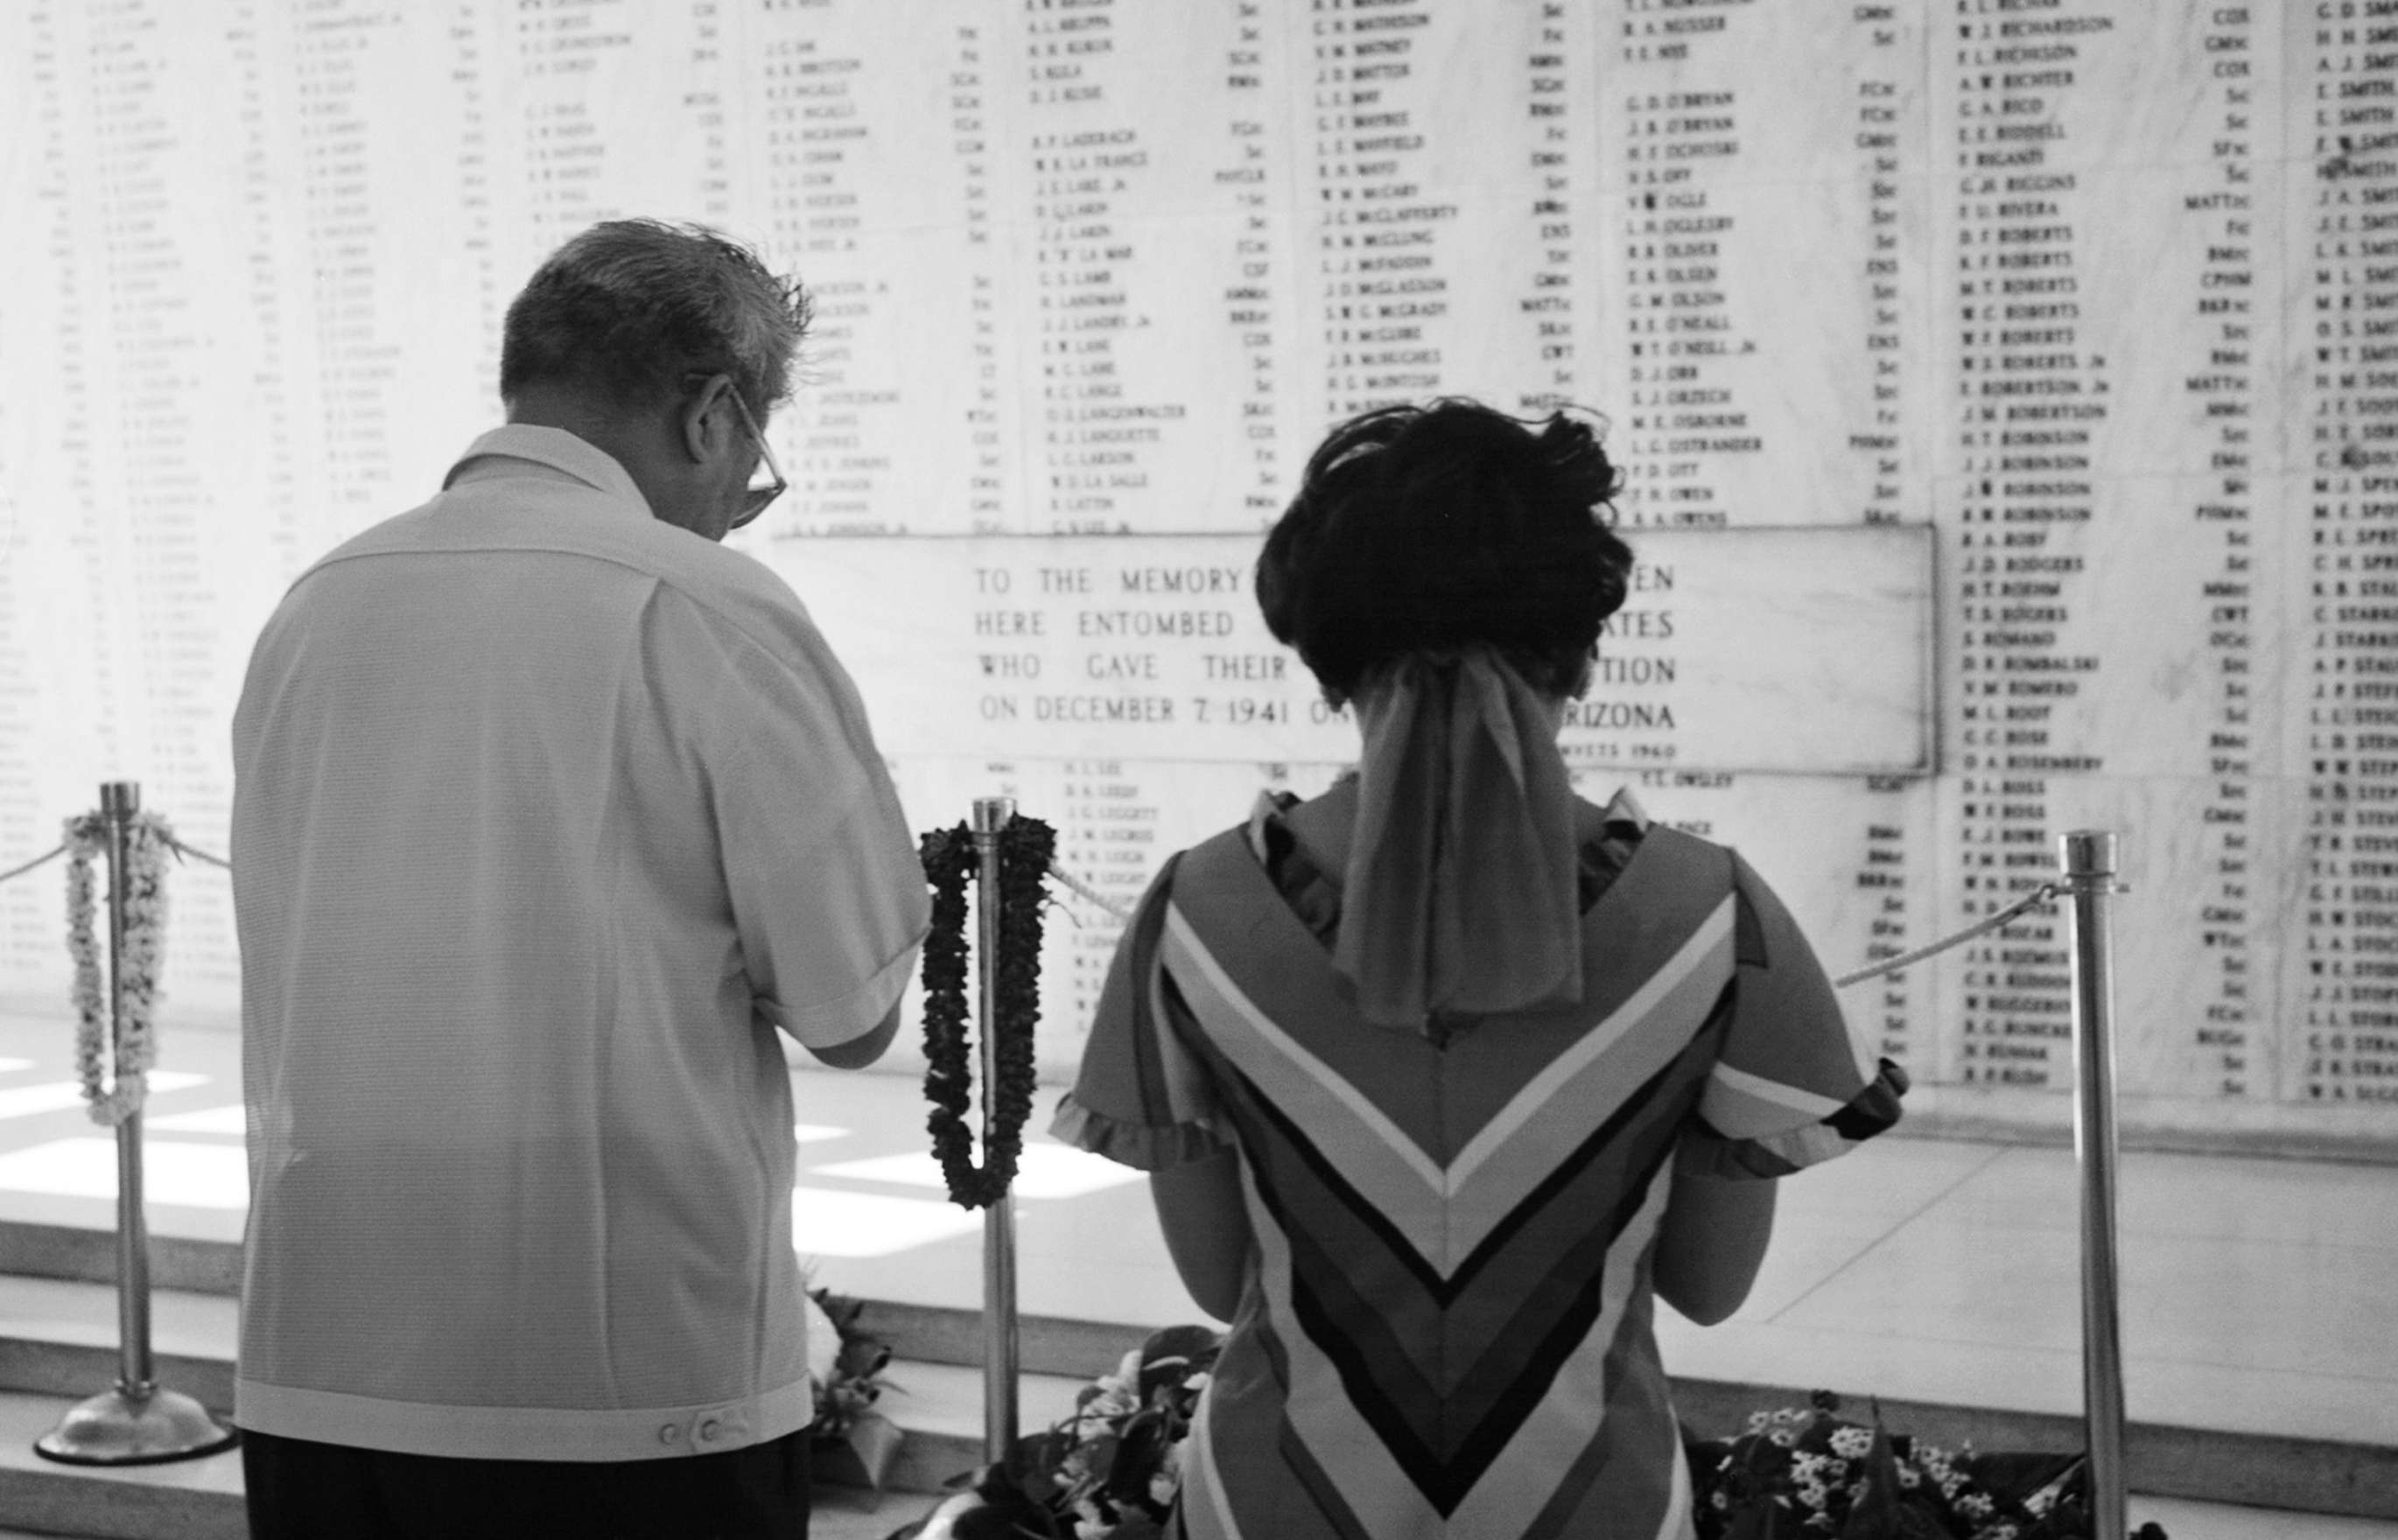 Shinjo and Masako in lay clothes, facing away, bow their heads in prayer before the marble wall of the Arizona Memorial inscribed with the names of the dead at Pearl Harbor.